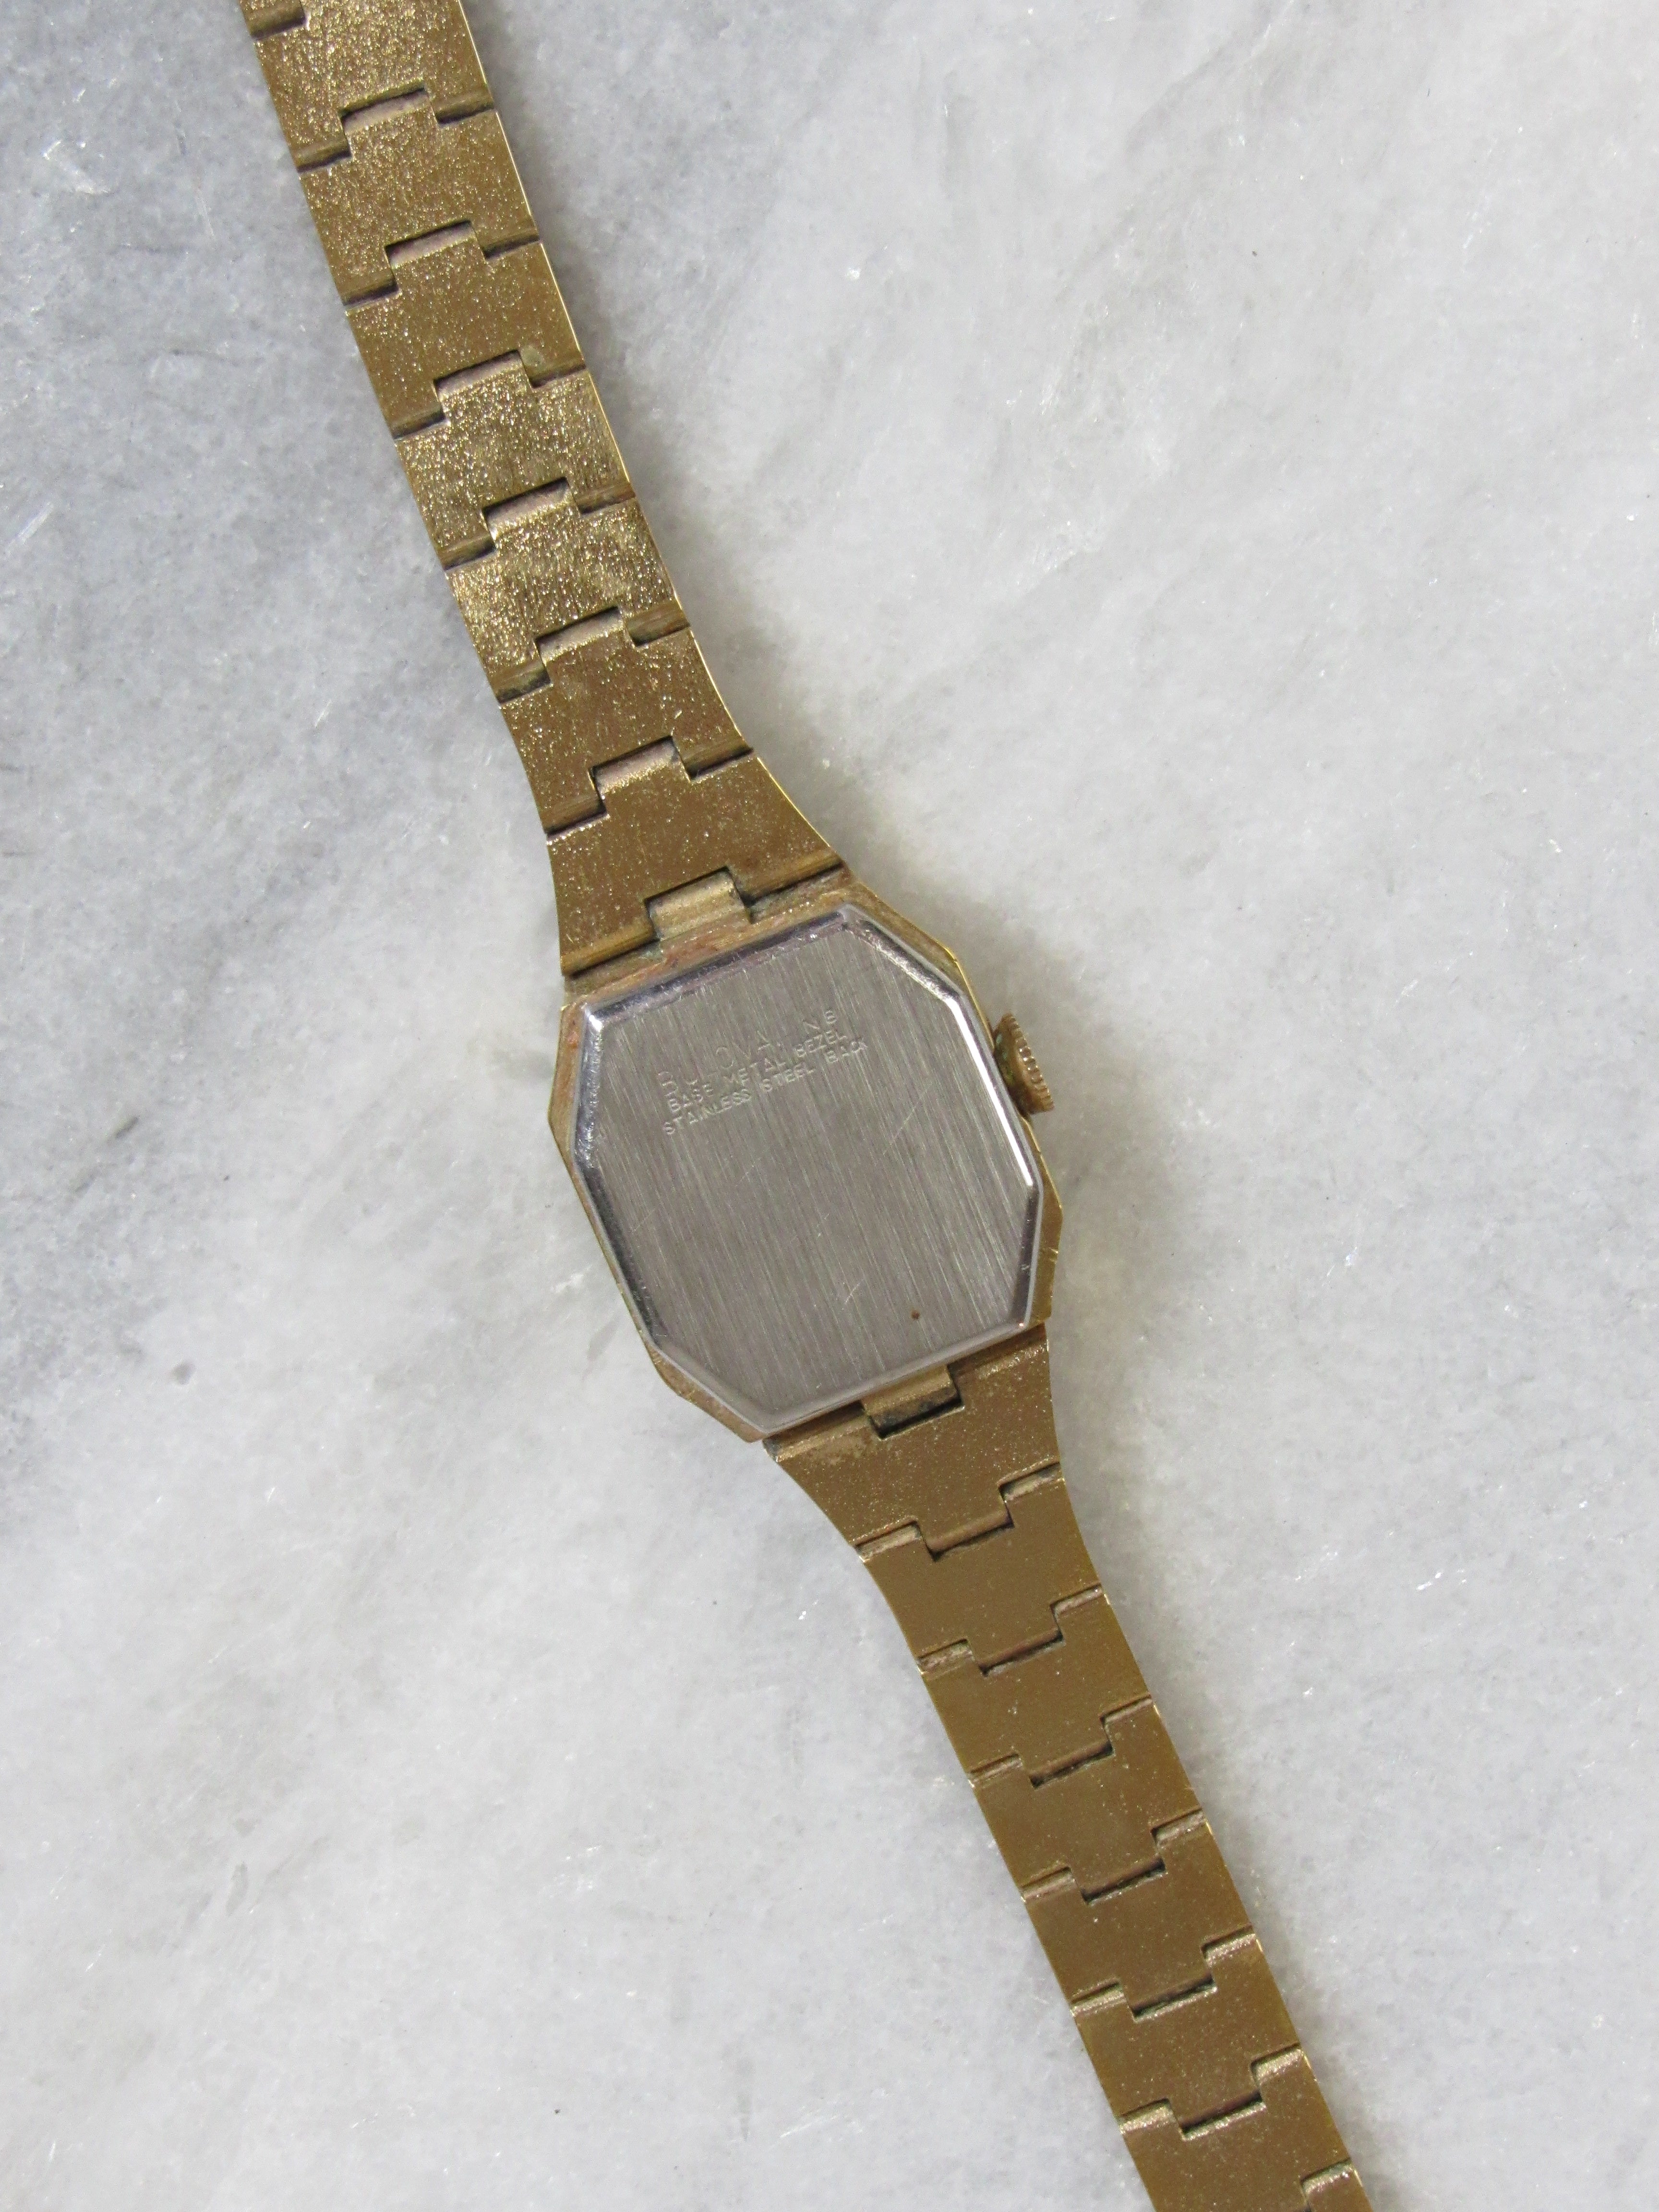 Bulova Accutron Square 18k Gold Plated Mechanical Ladies Watch